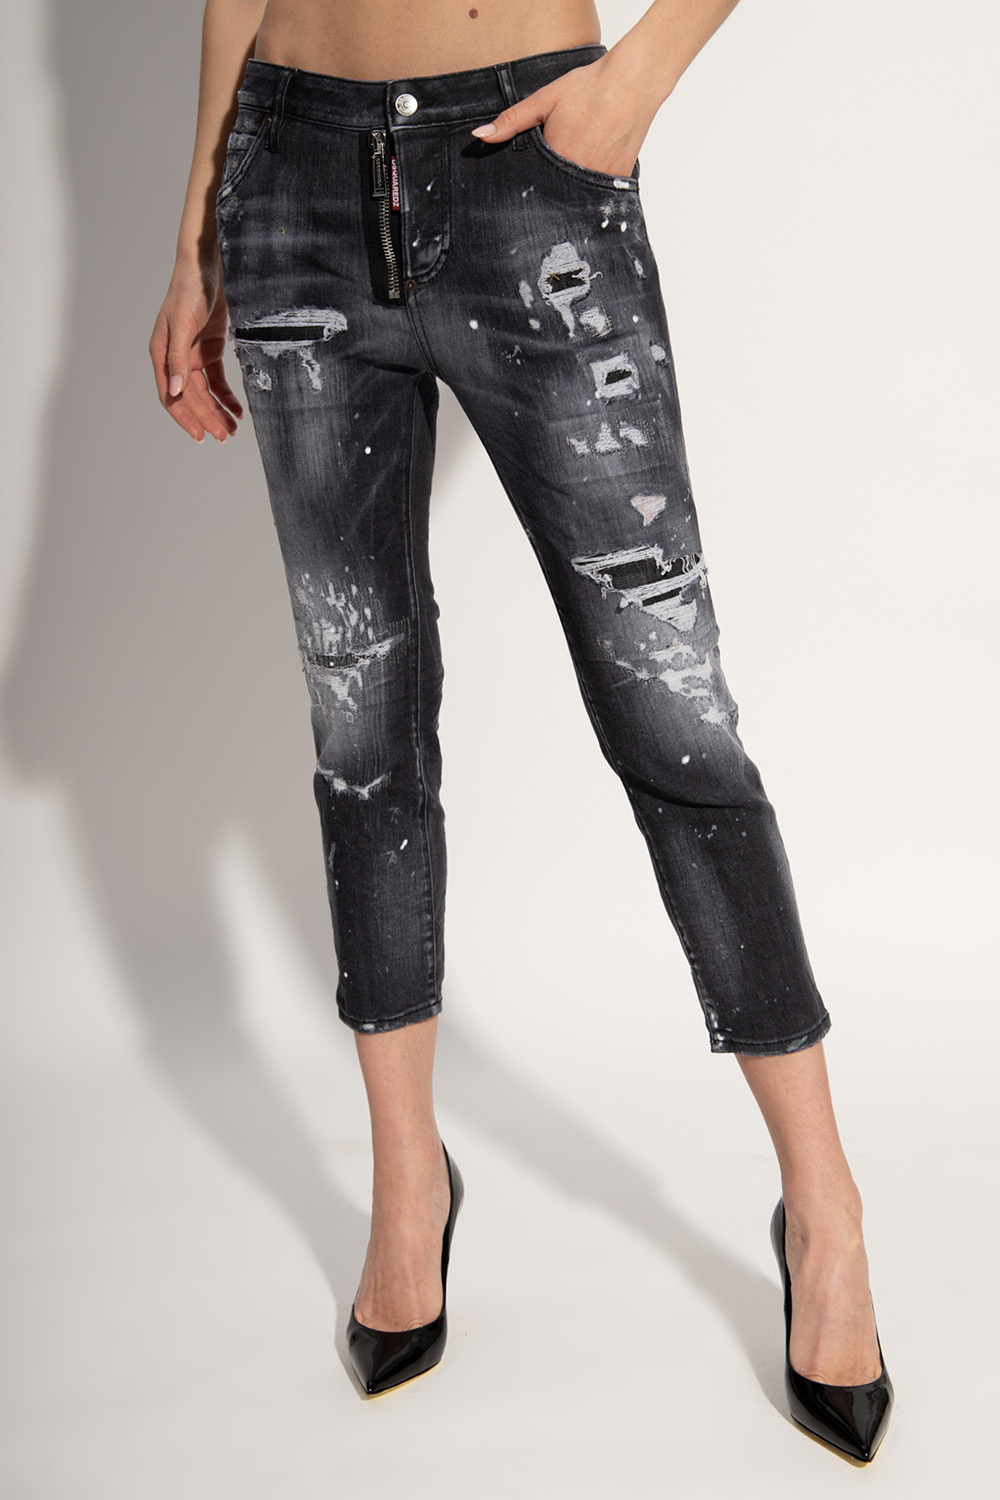 Dsquared2 'Cool Girl Cropped' jeans | Women's Clothing | IetpShops